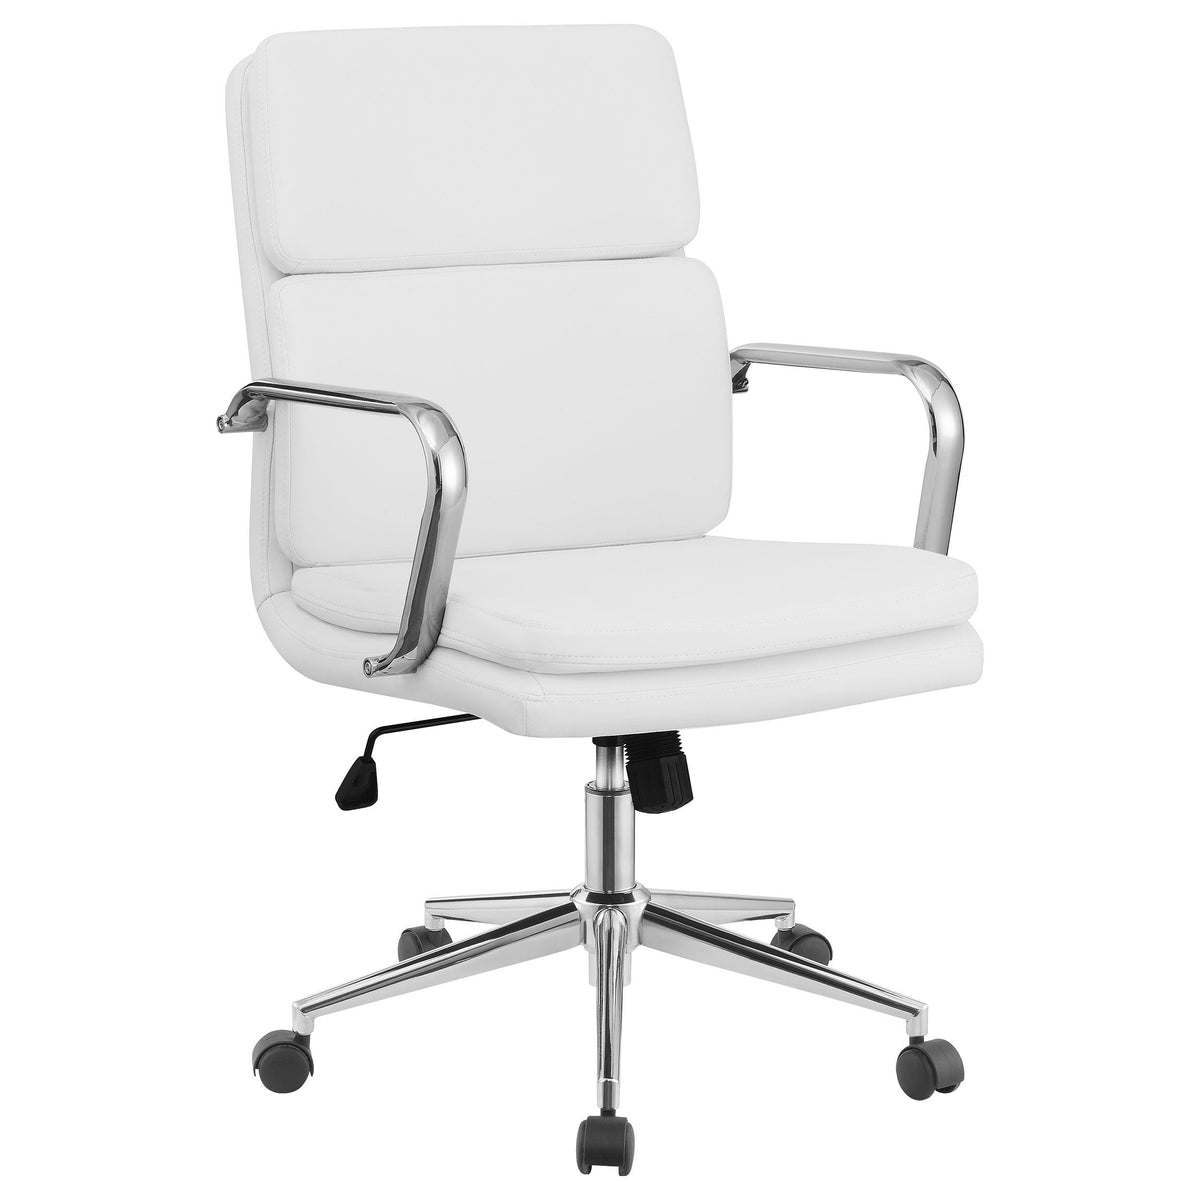 Ximena Standard Back Upholstered Office Chair White Ximena Standard Back Upholstered Office Chair White Half Price Furniture